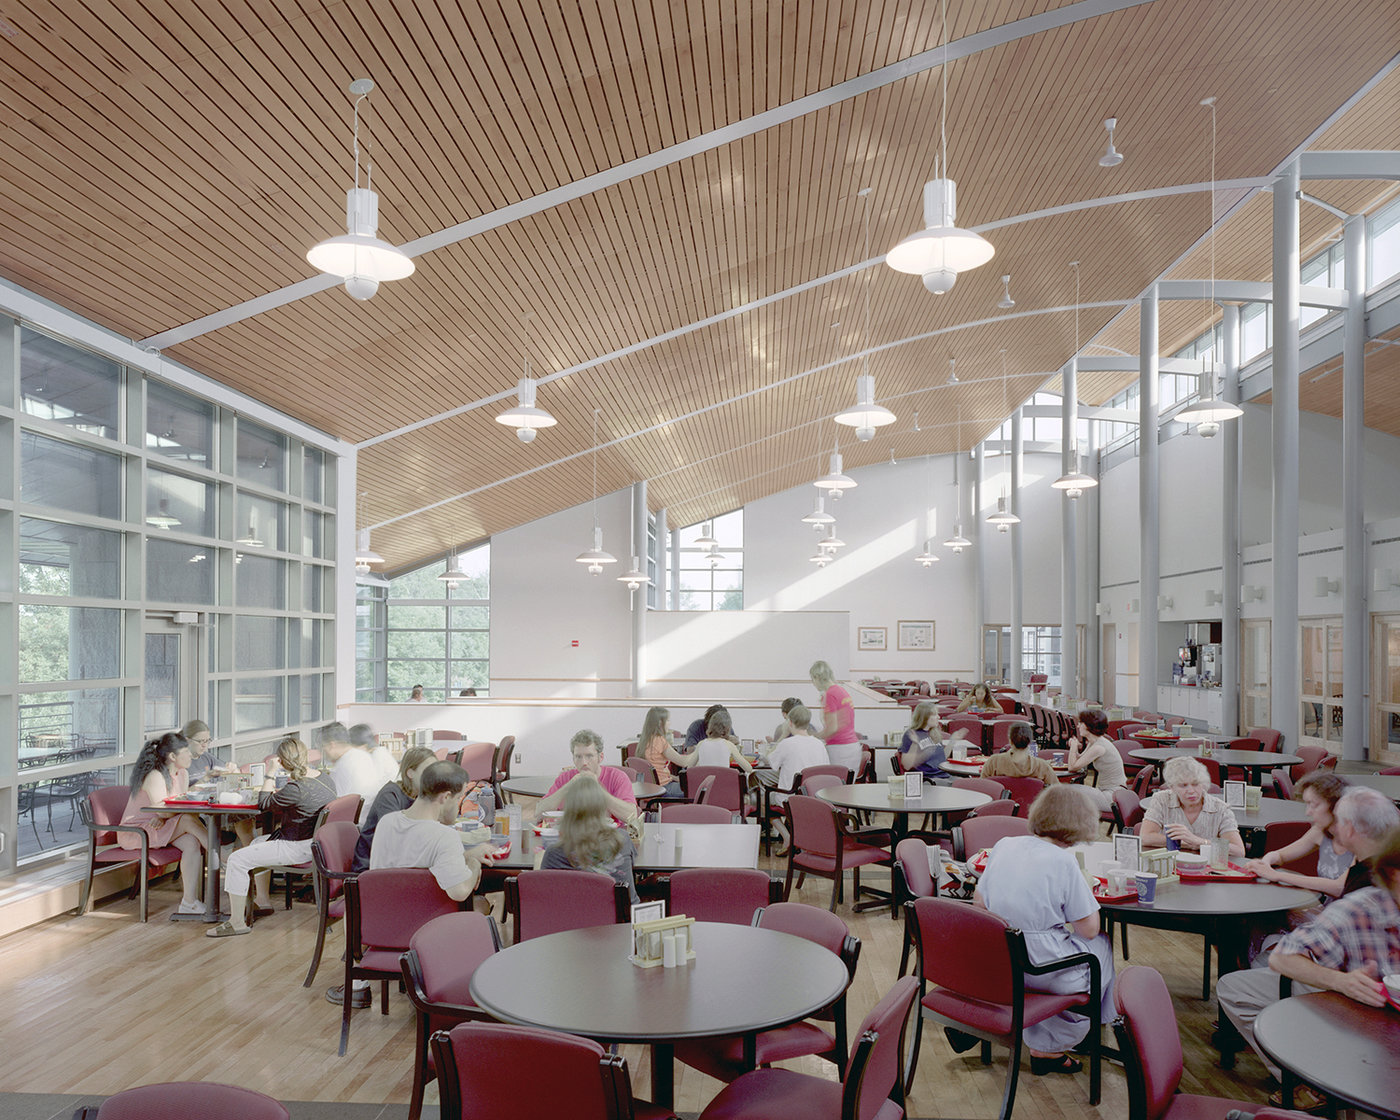 9 tskp middlebury college ross commons laforce hall interior detail dining hall view of skylights copy 1400 xxx q85